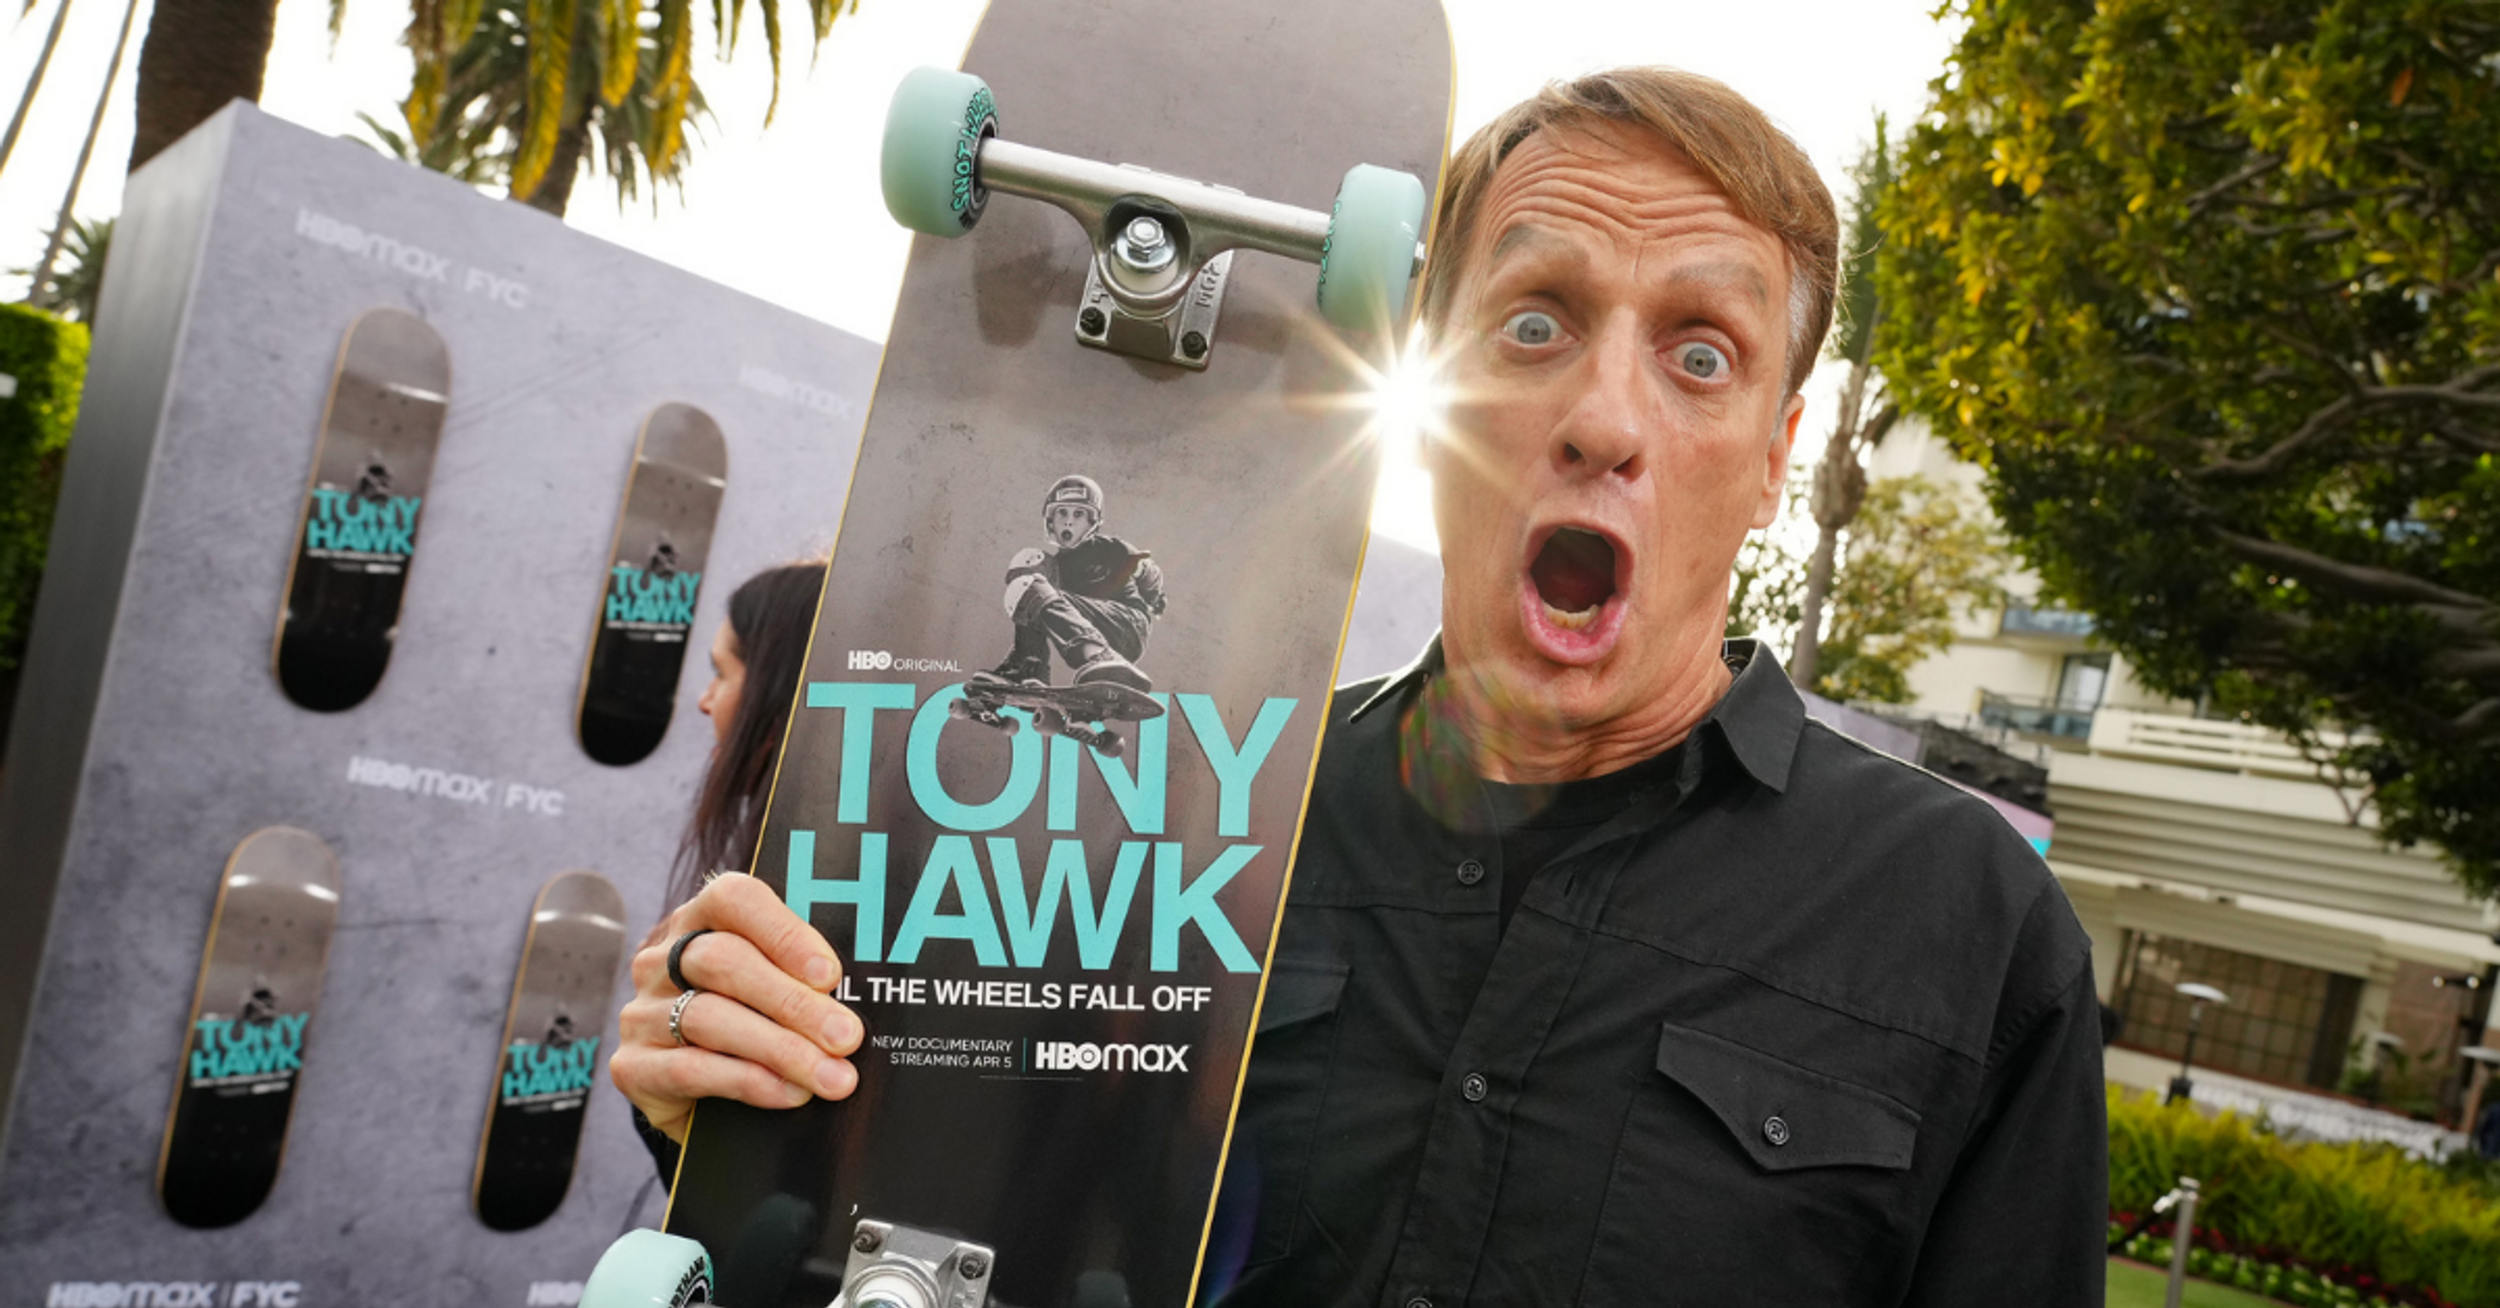 Tony Hawk Has Fans LOLing With His Thread About Not Quite Being Recognized On An Elevator